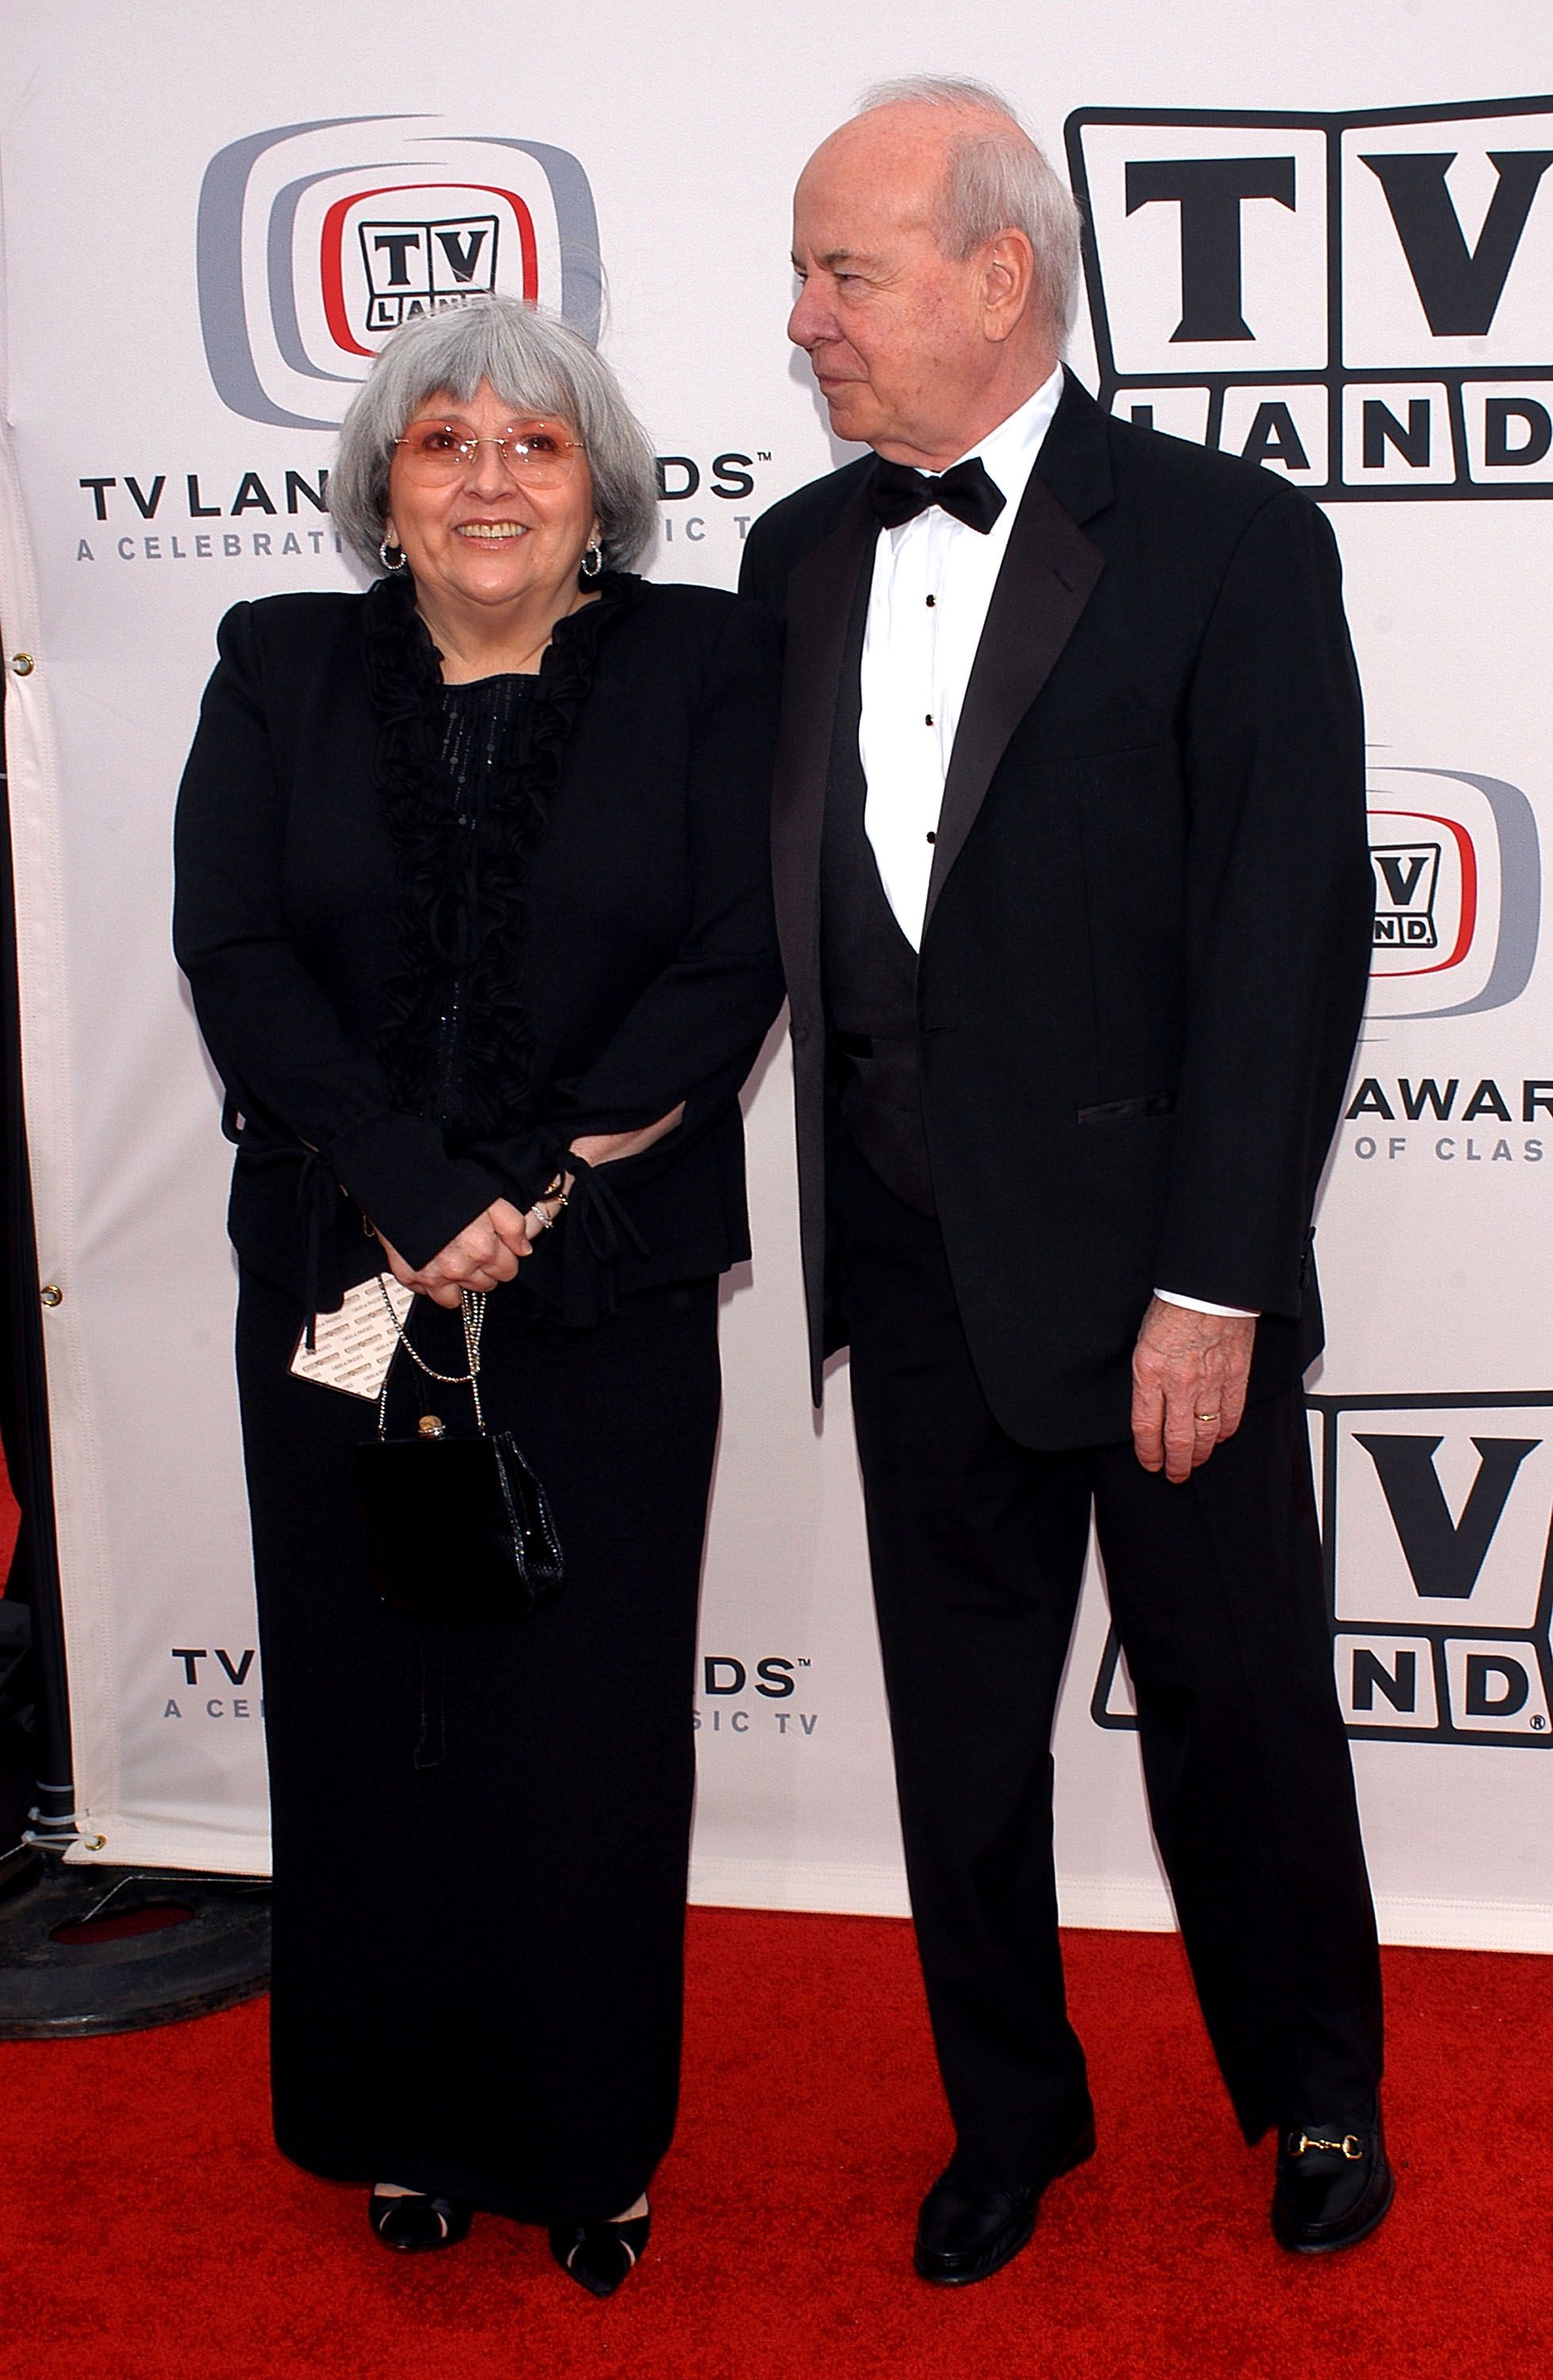 Tim Conway attends the 2005 TV Land Awards | Source: Getty Images